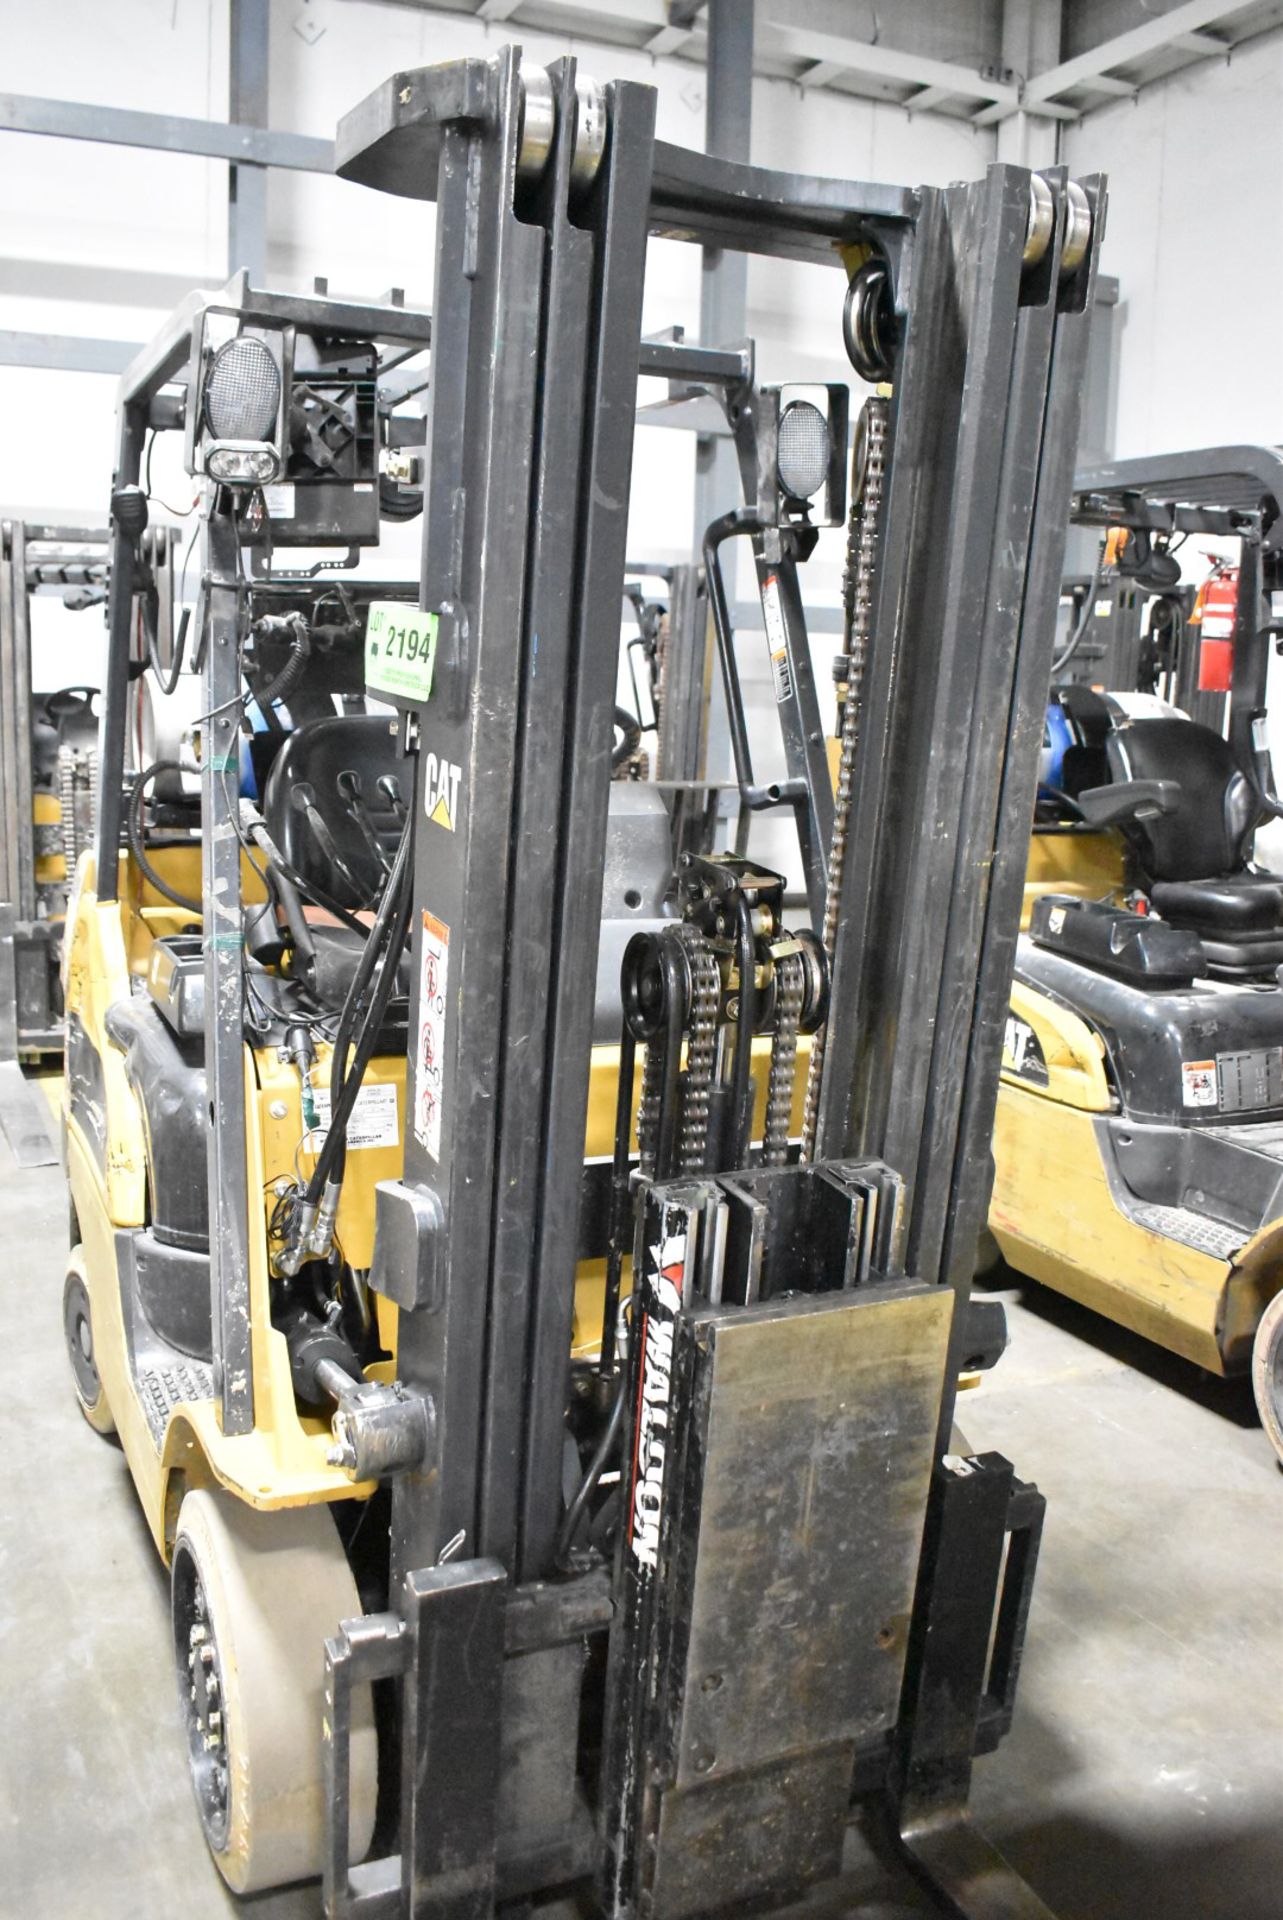 CATERPILLAR 2C5000 4,950 LBS. CAPACITY LPG FORKLIFT WITH 187" MAX VERTICAL REACH, 3-STAGE HIGH - Image 3 of 9